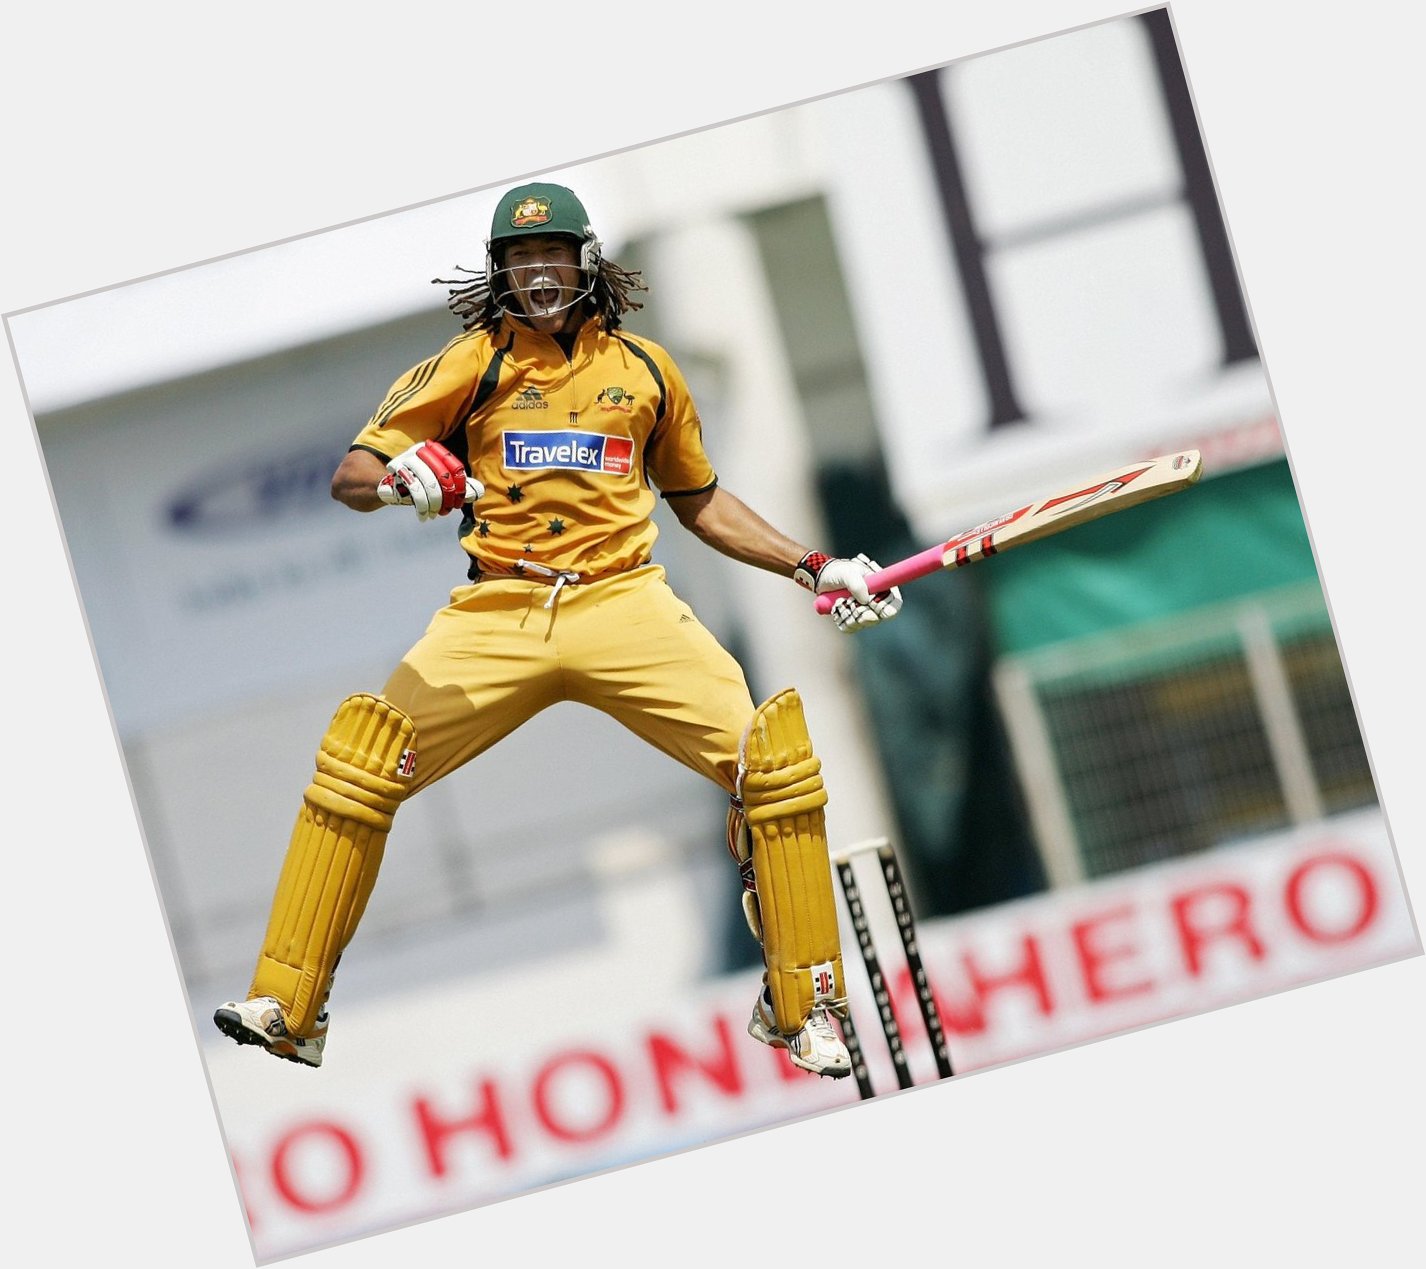 Scored Duck in his Last Test Inning
Scored Duck in his Last T20I Inning

Happy Birthday Andrew Symonds. 